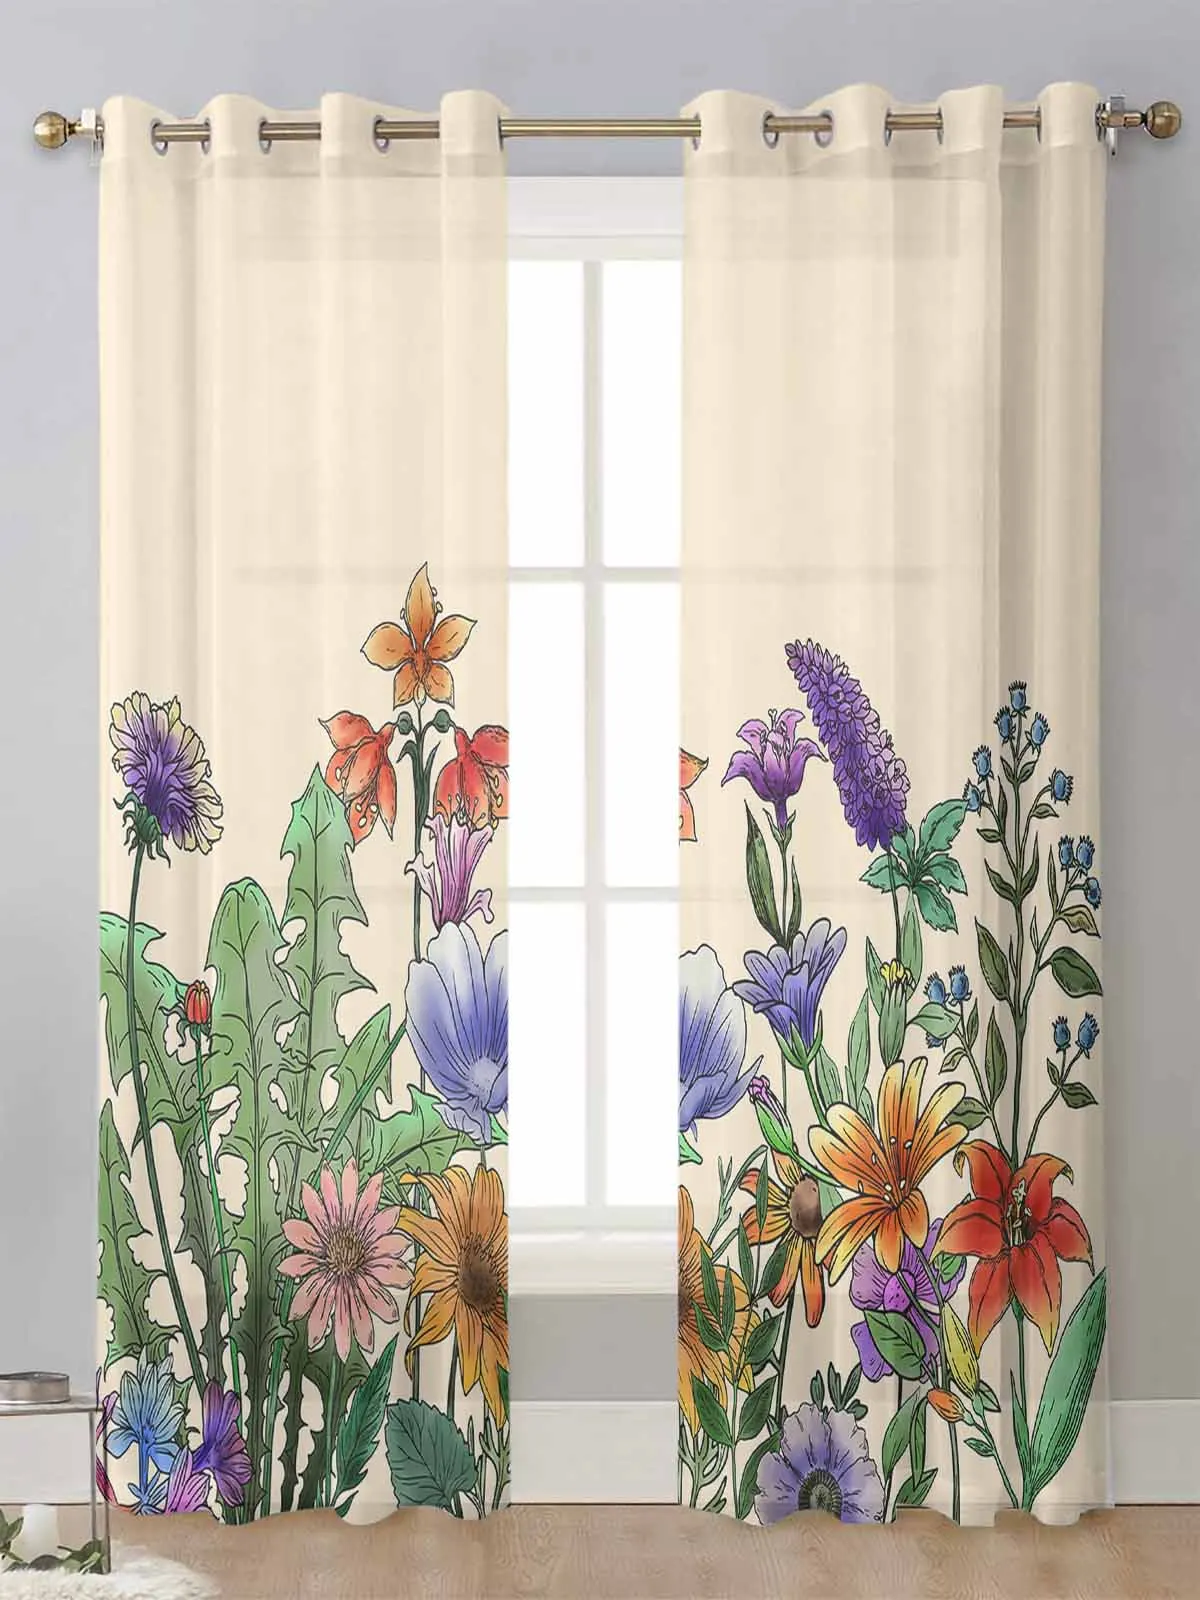 

Plant Flower Petunia Lavender Sheer Curtains For Living Room Window Transparent Voile Tulle Curtain Cortinas Drapes Home Decor